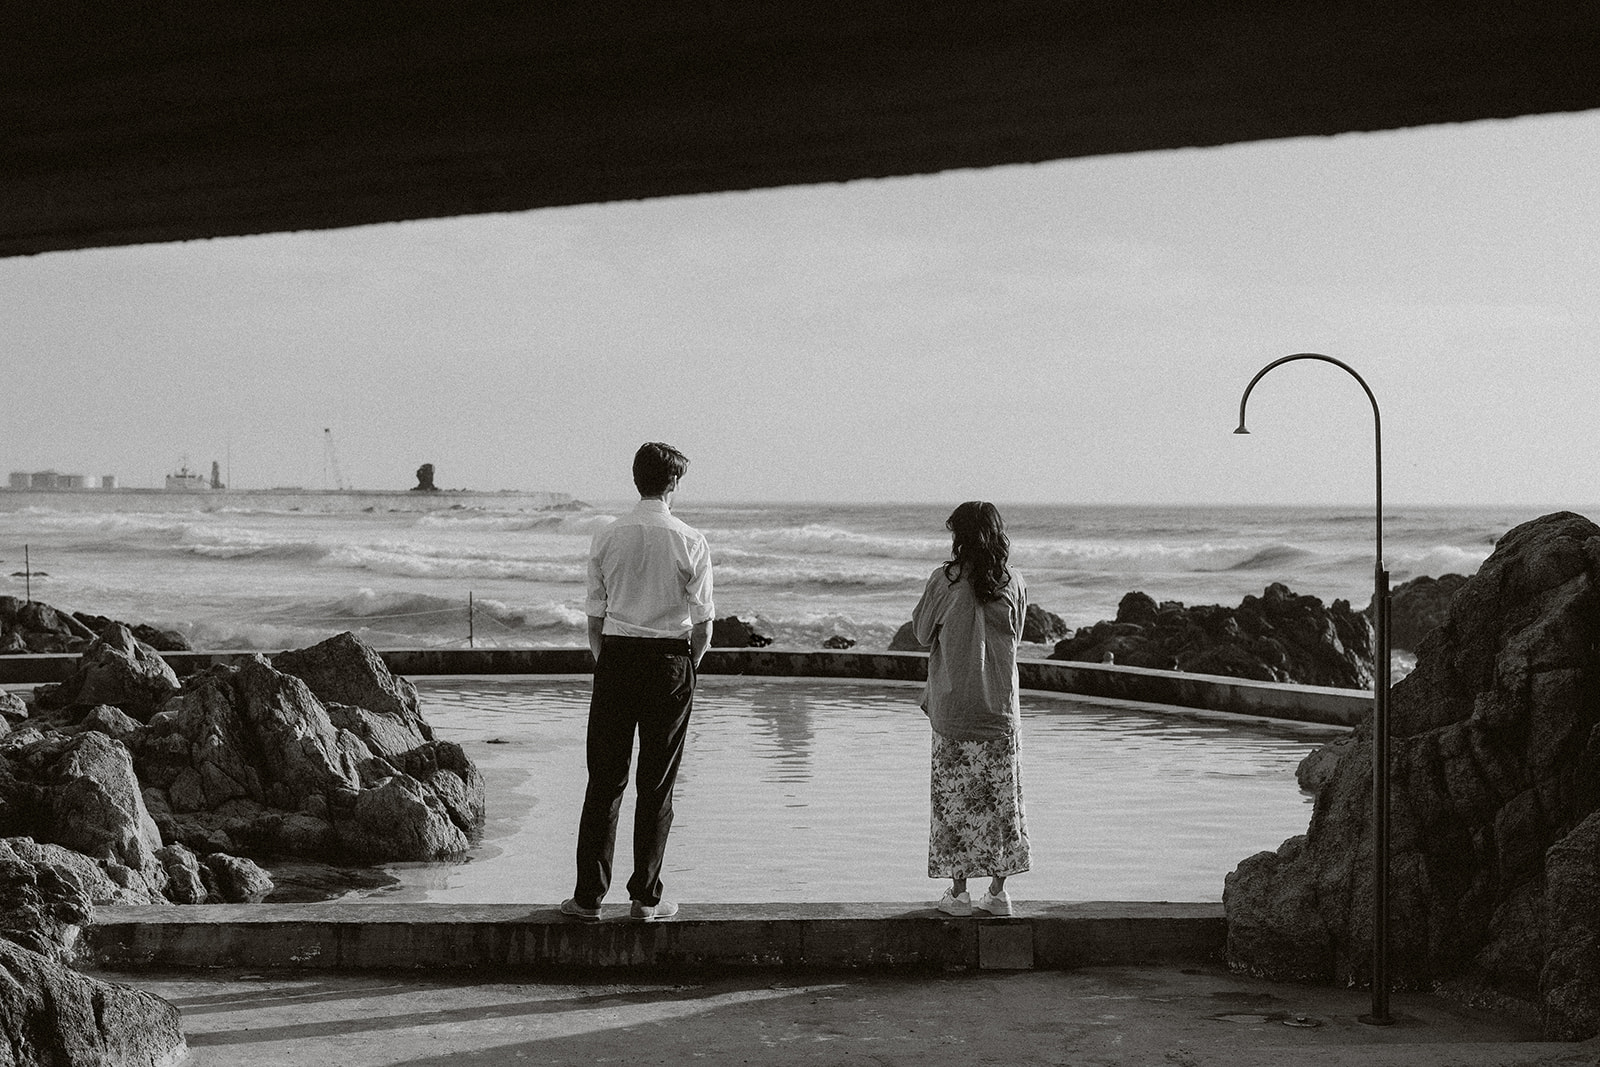 An ocean inspired editorial architectural engagement session in Siza Vieira's Tidal Pools and Boa Nova Tea House.